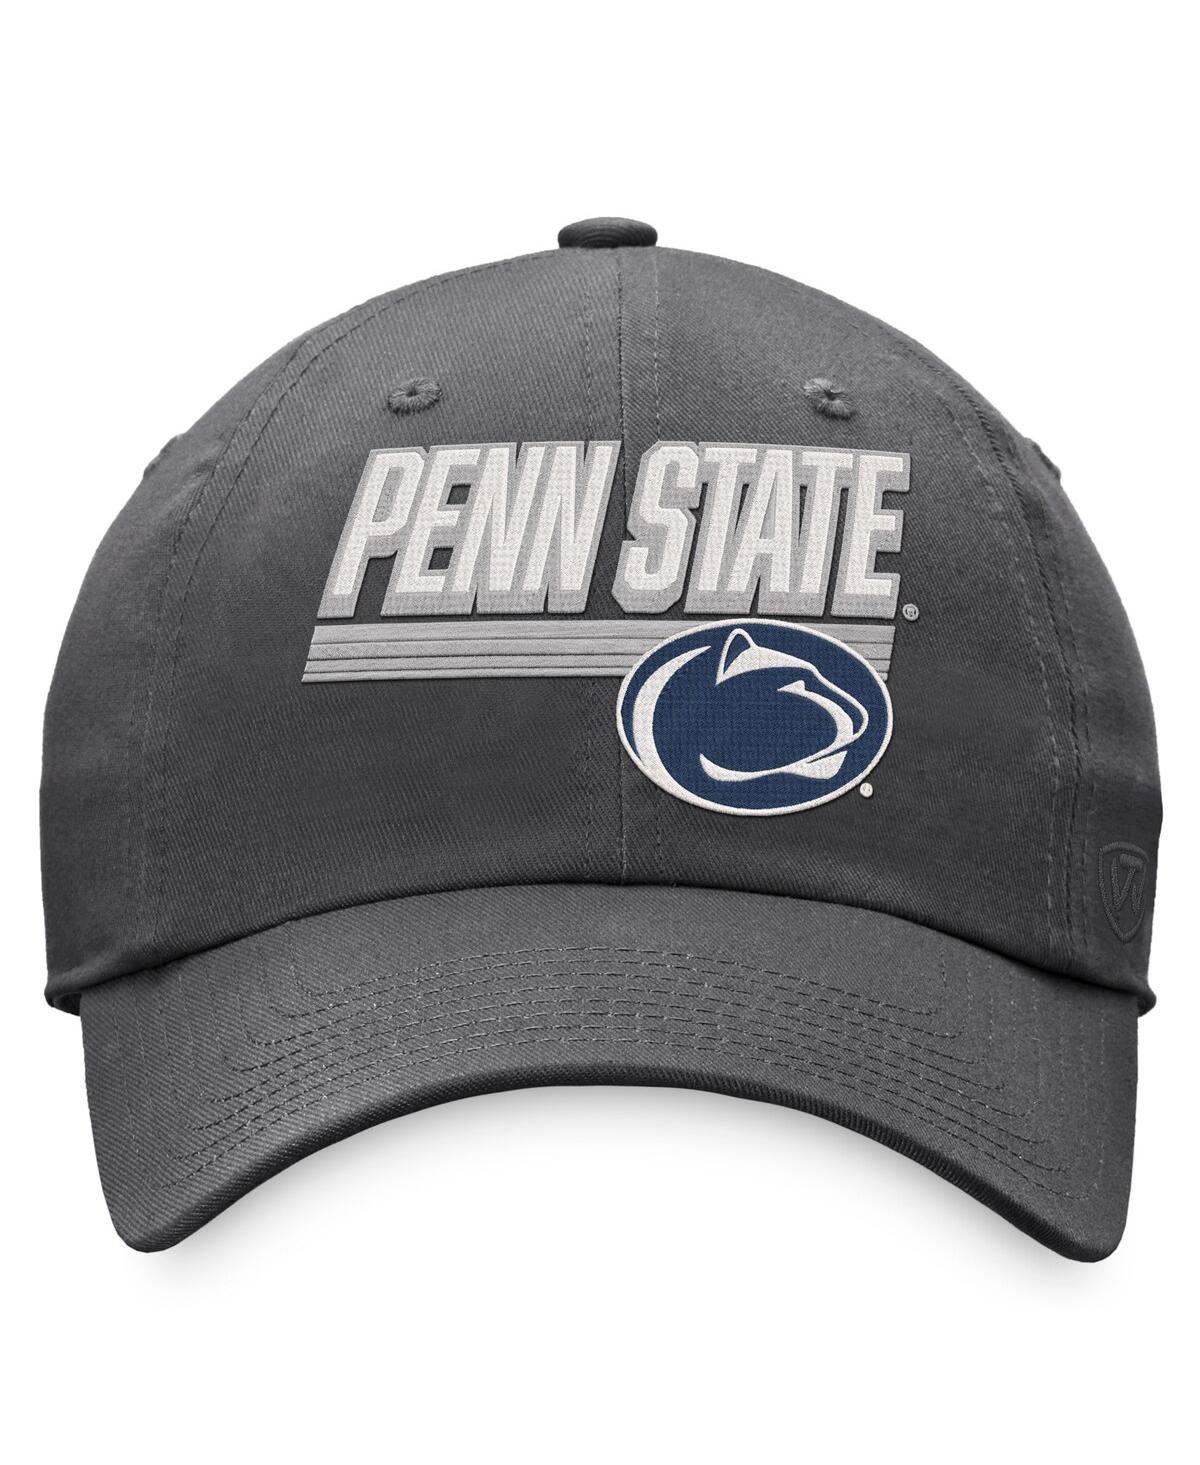 Shop Top Of The World Men's  Charcoal Penn State Nittany Lions Slice Adjustable Hat